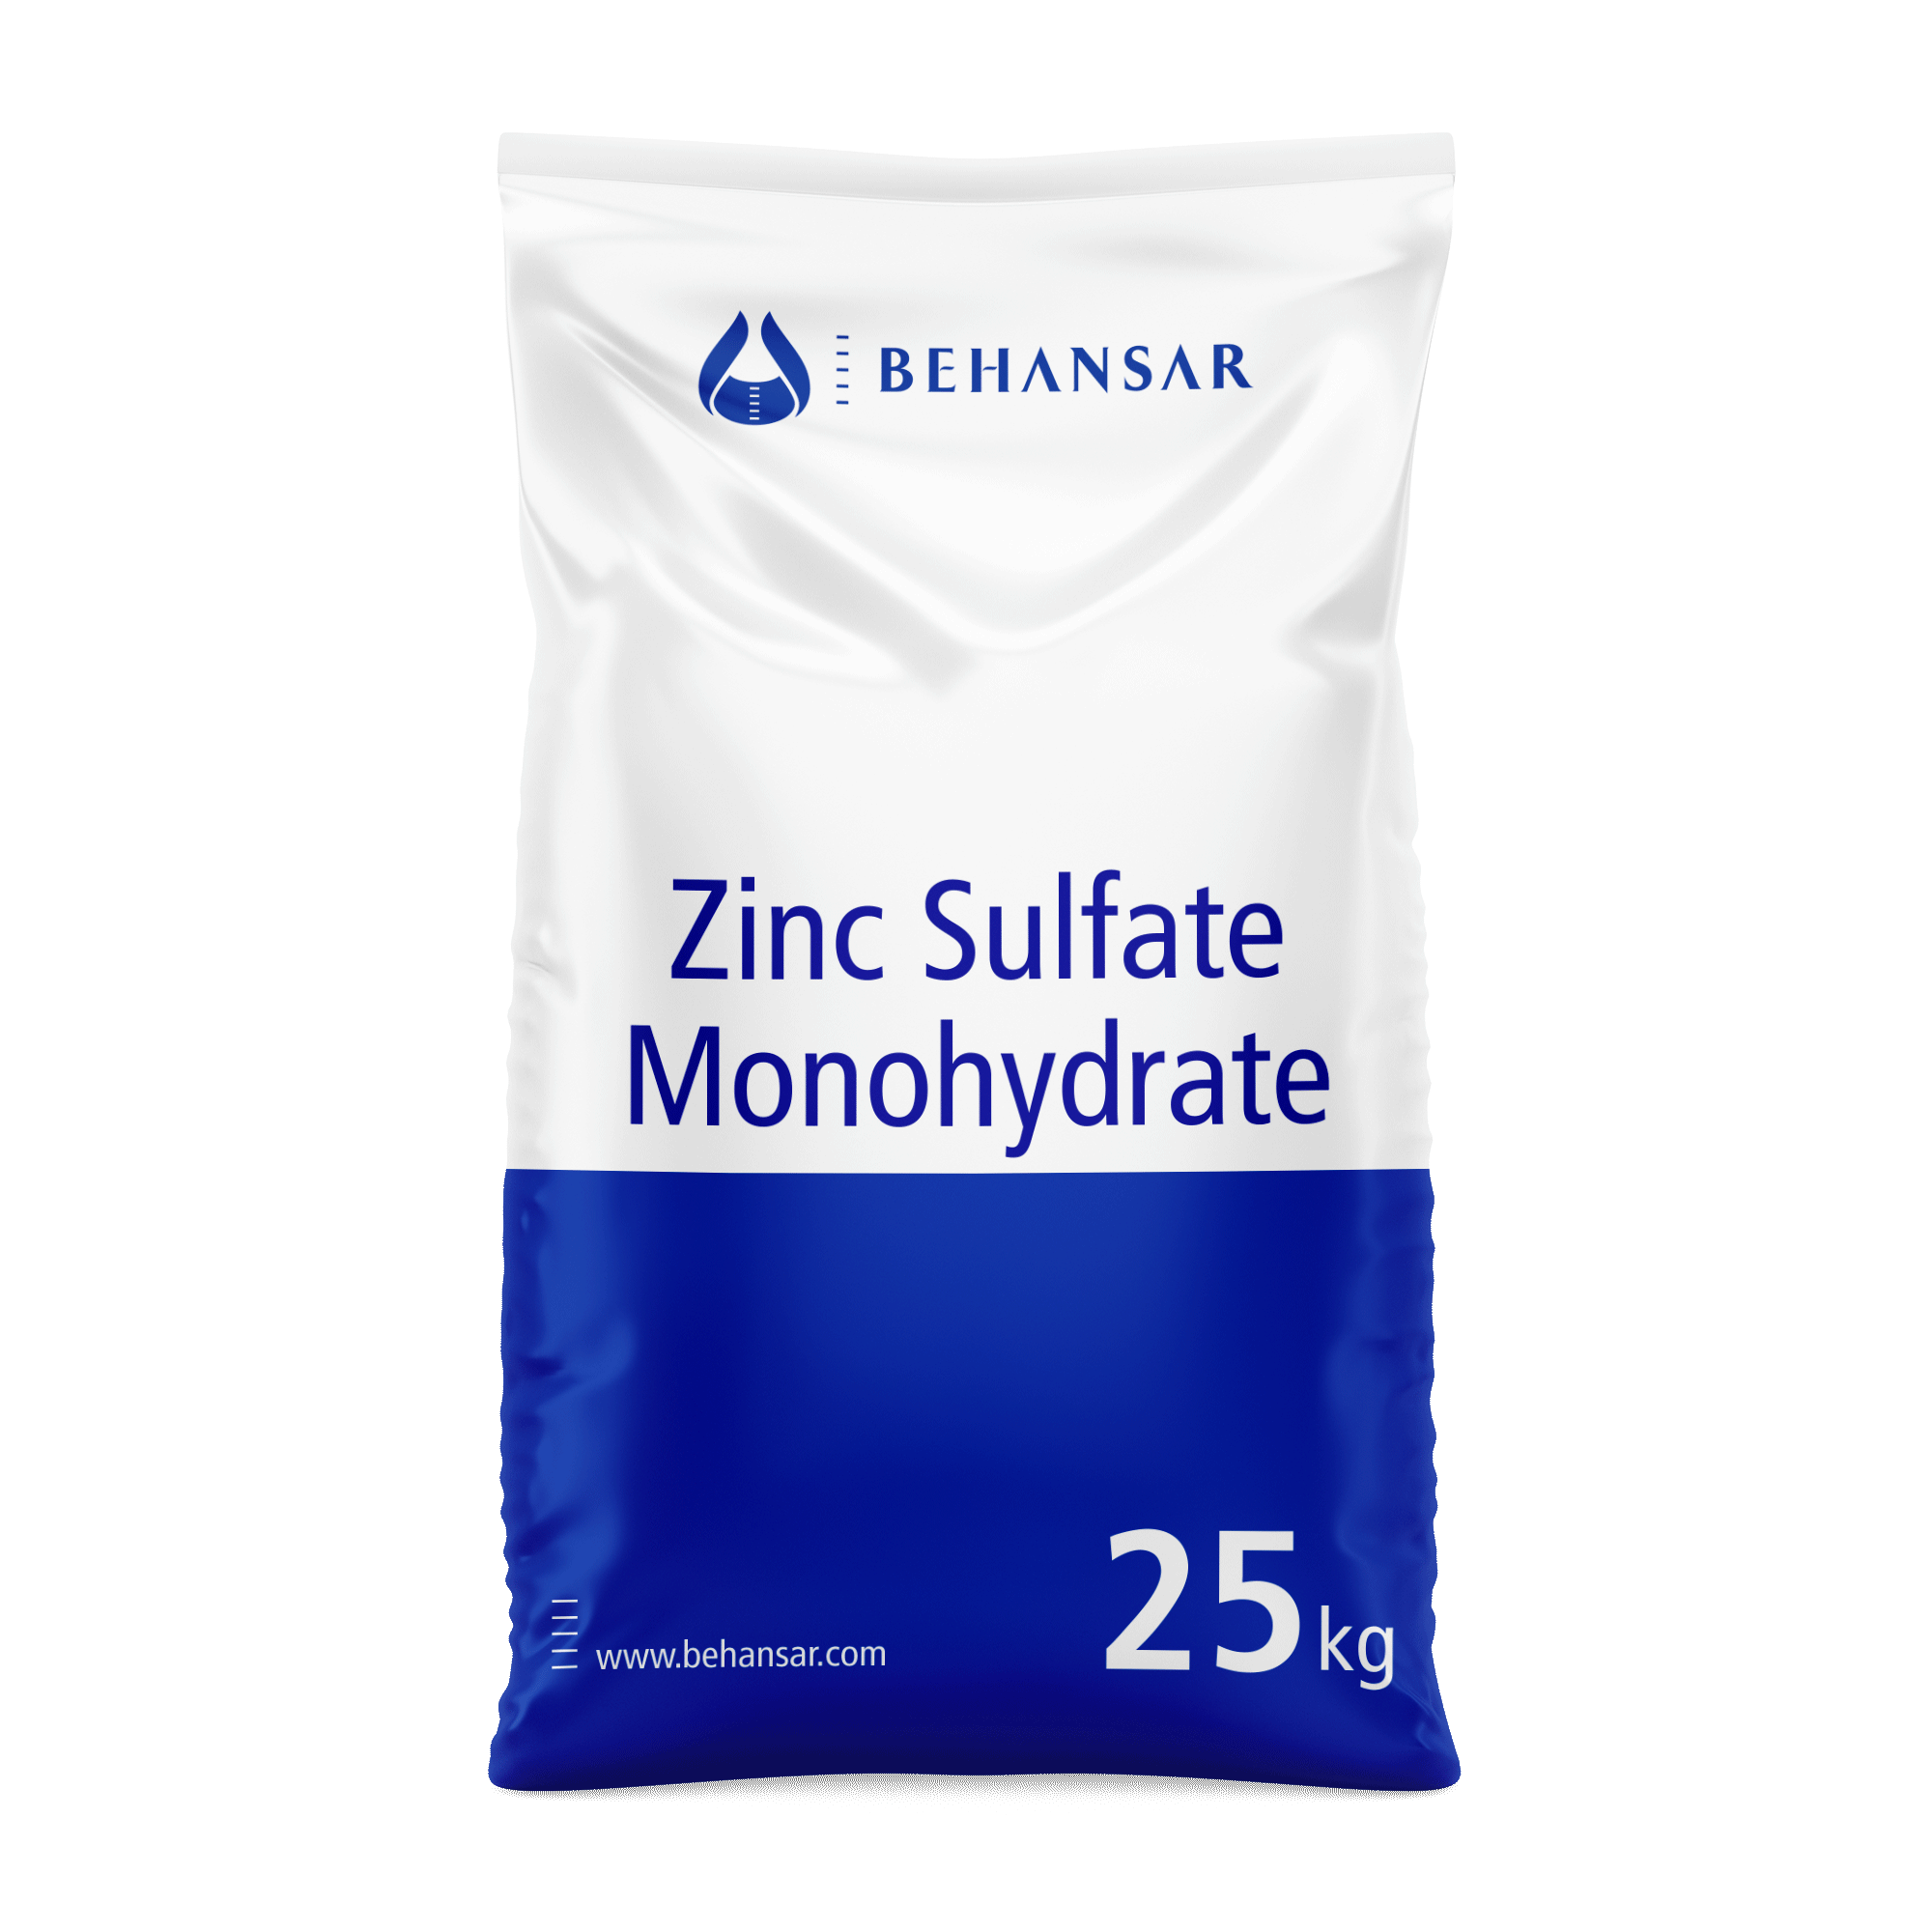 Zinc Sulfate Monohydrate is one of the products of Behansar Co